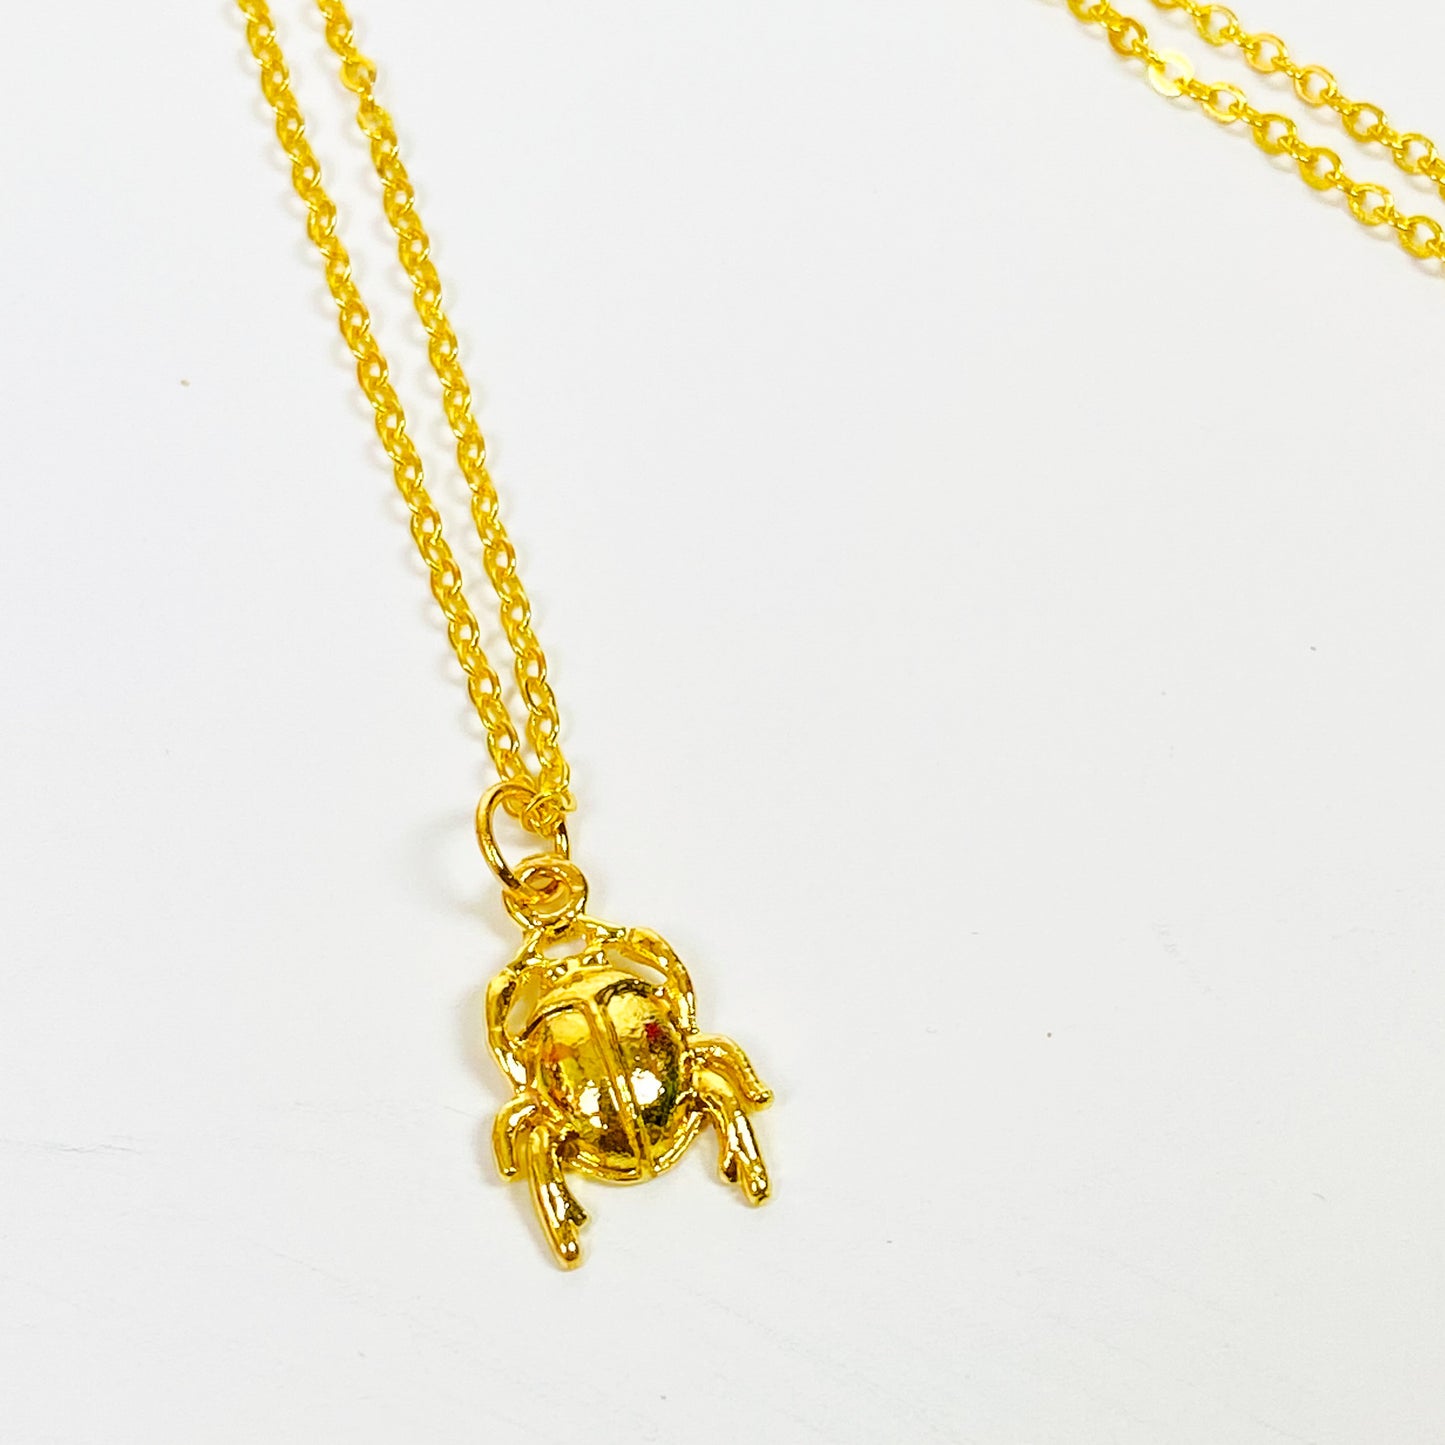 Retro Beetle Necklace Chain Gold